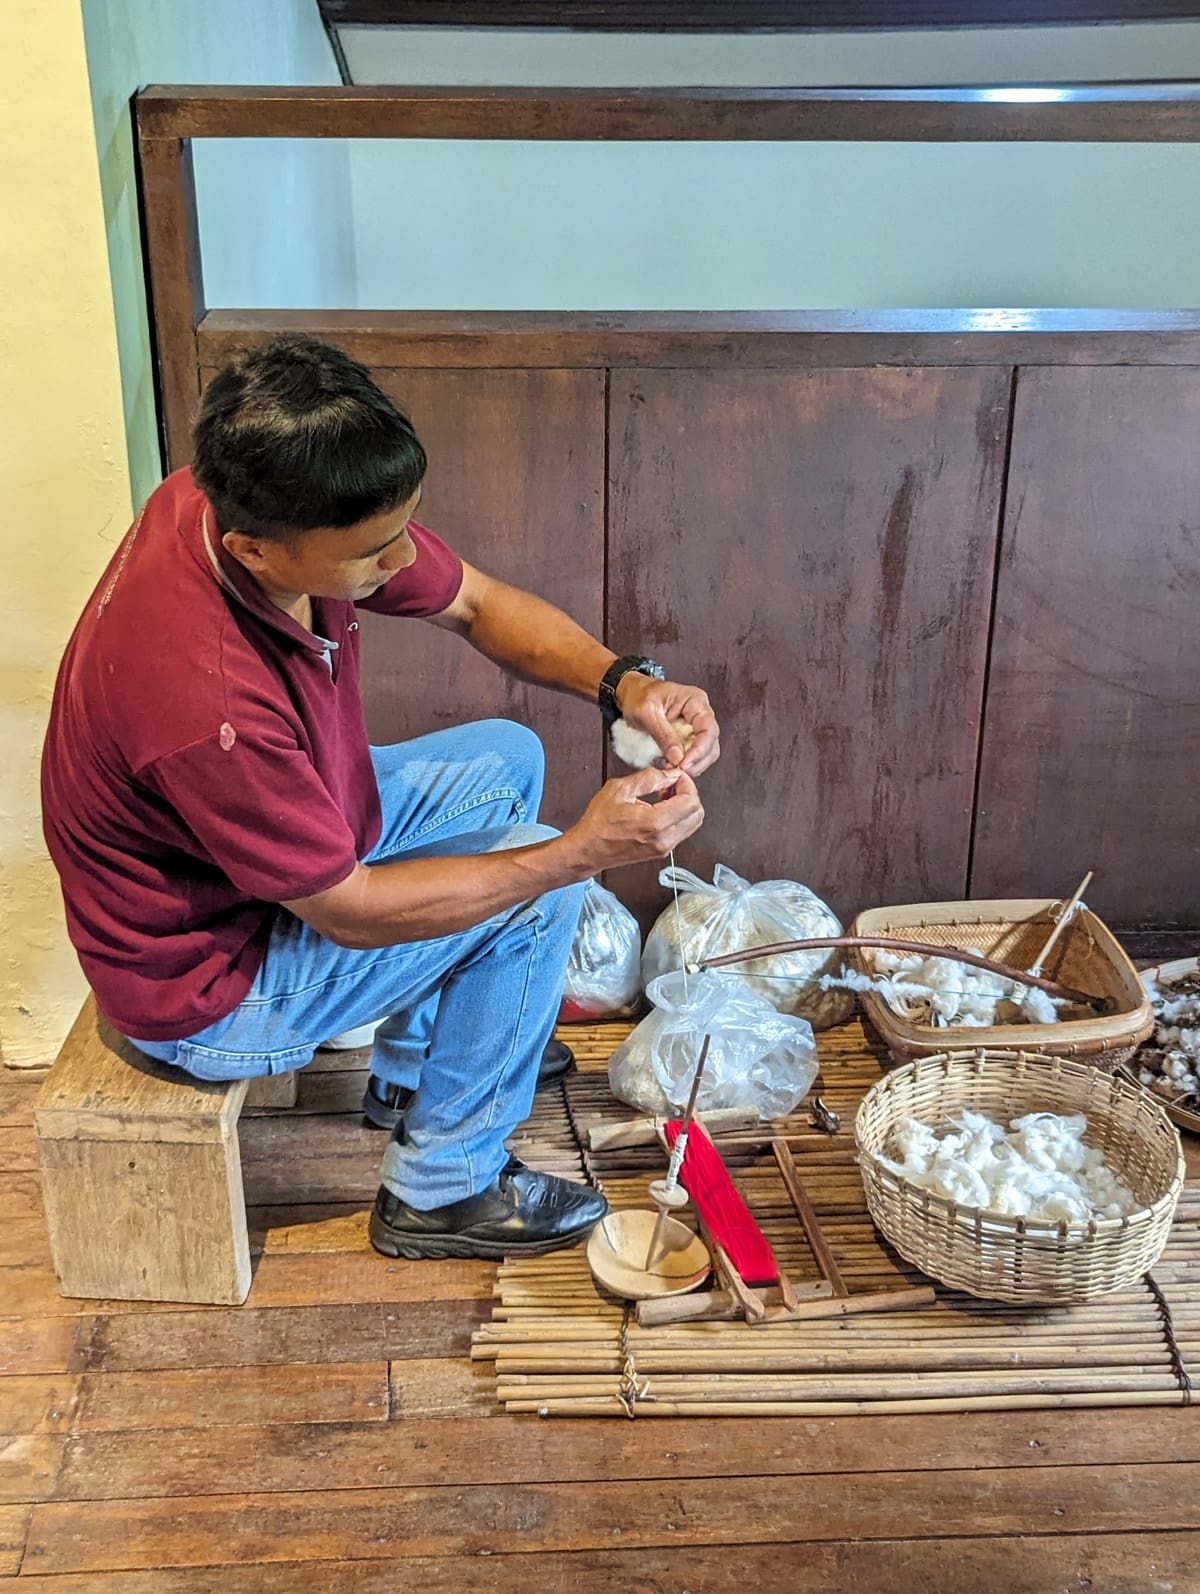 A man demontrating spinning cotton